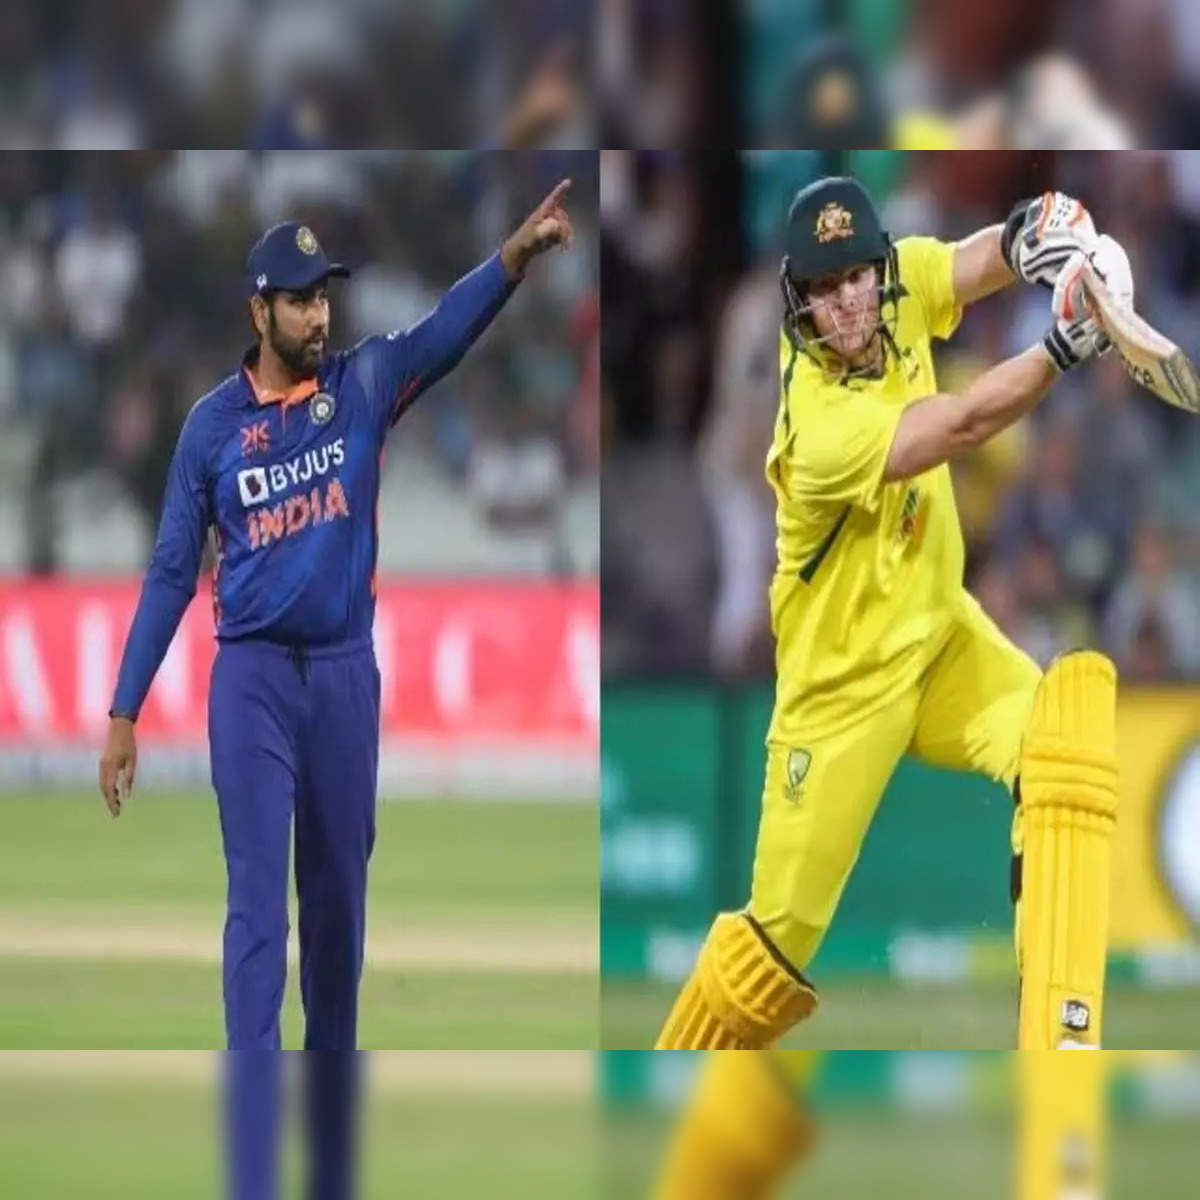 India vs Australia 3rd T20 match: When, where and how to watch